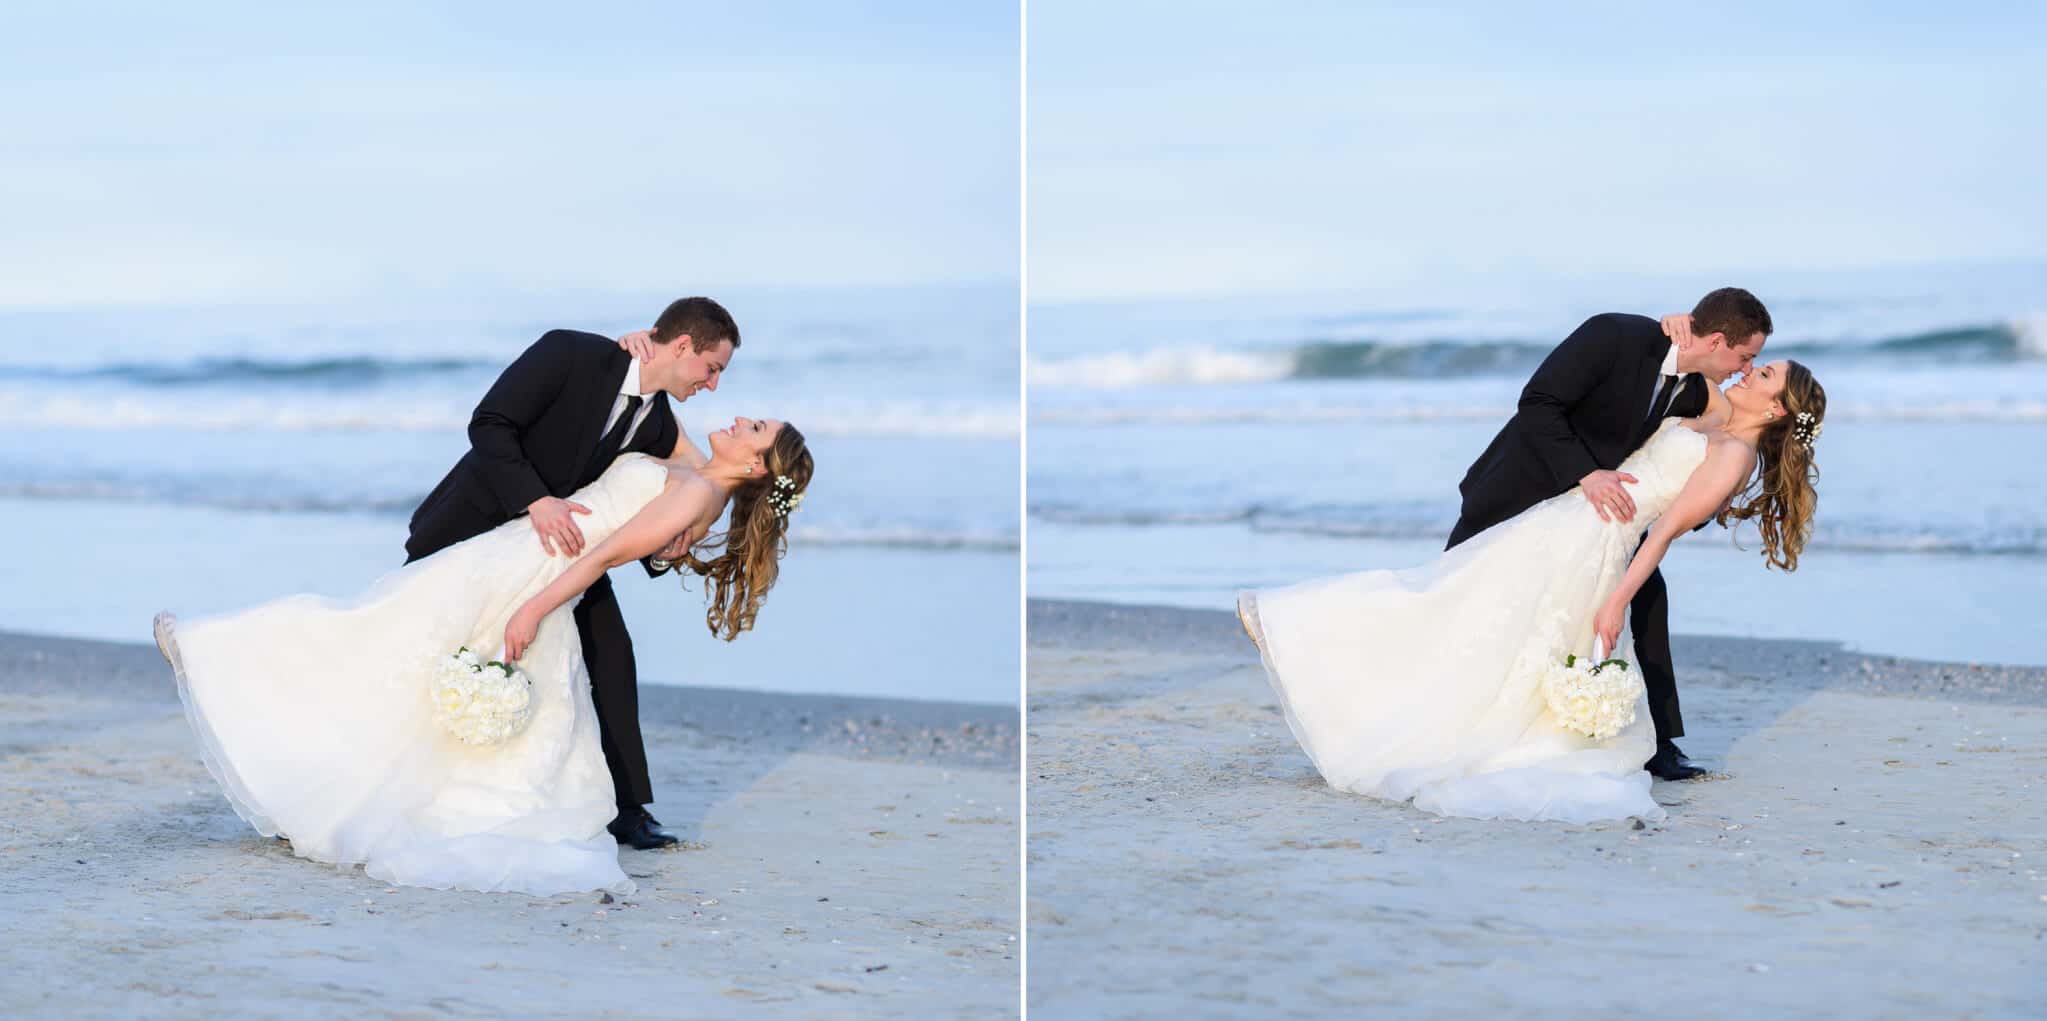 Dipping bride back for a kiss - North Beach Plantation